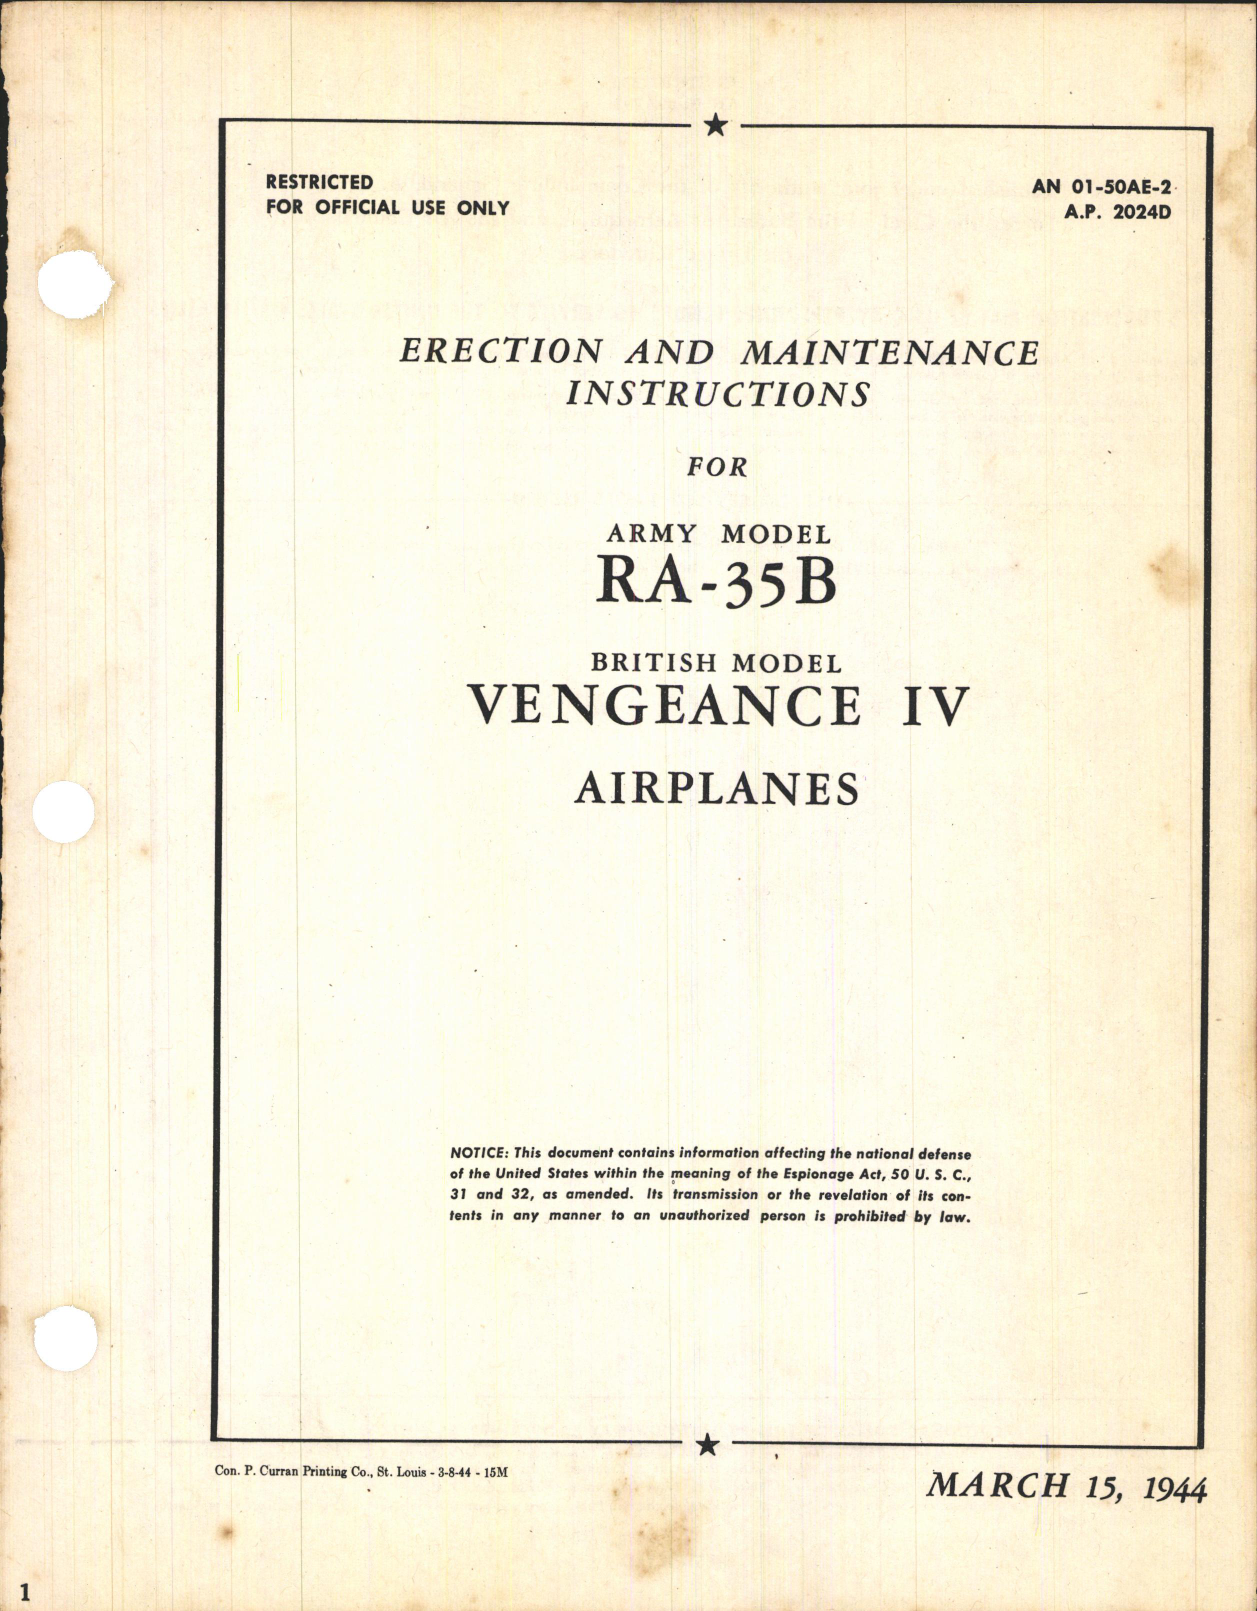 Sample page 1 from AirCorps Library document: Erection and Maintenance Instructions for RA-35B